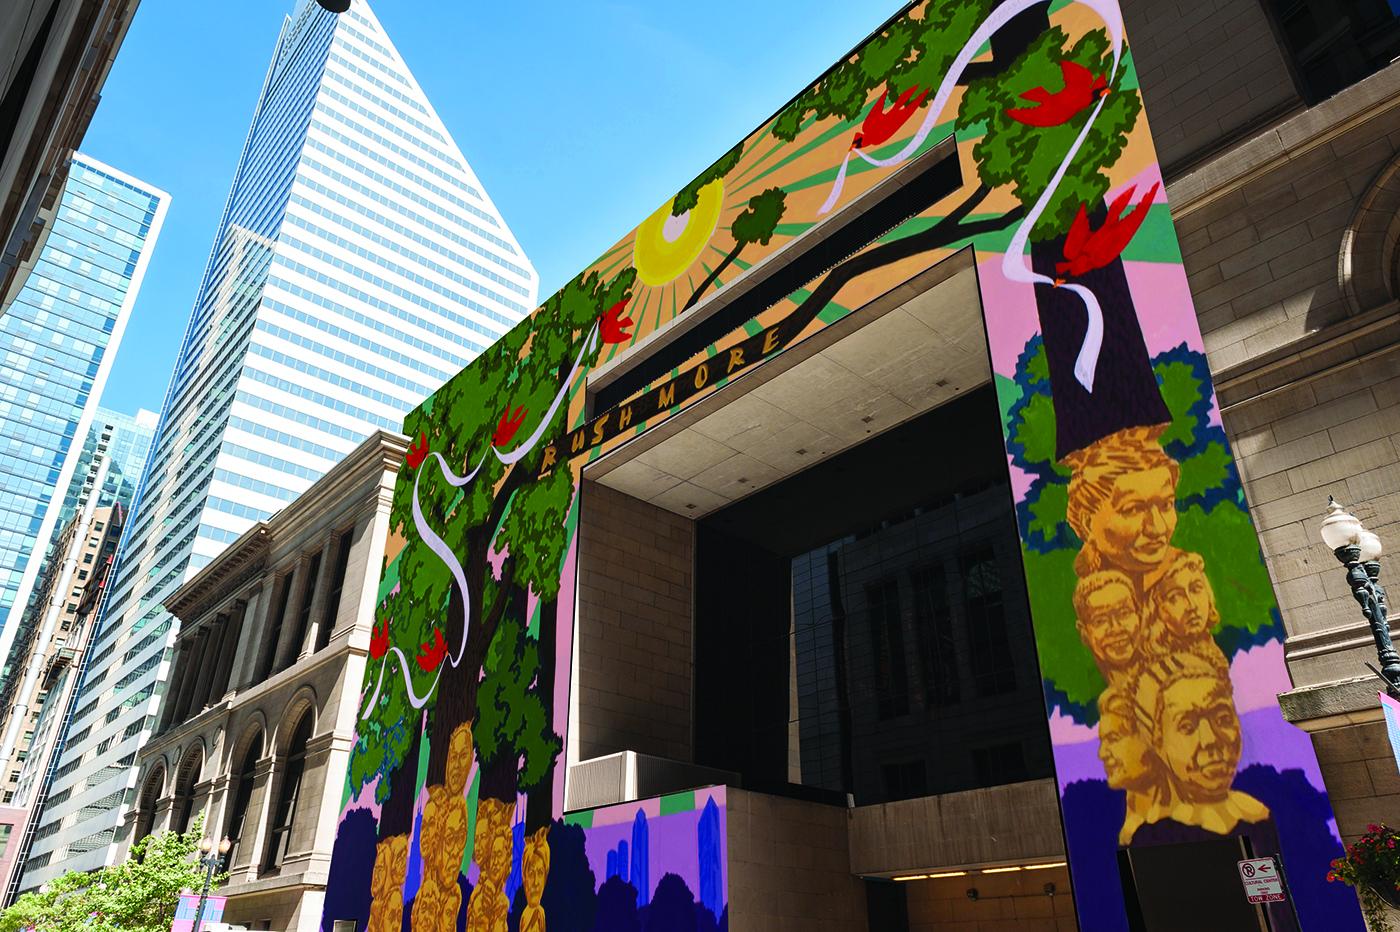 A rendering of Kerry James Marshall's Chicago Cultural Center mural